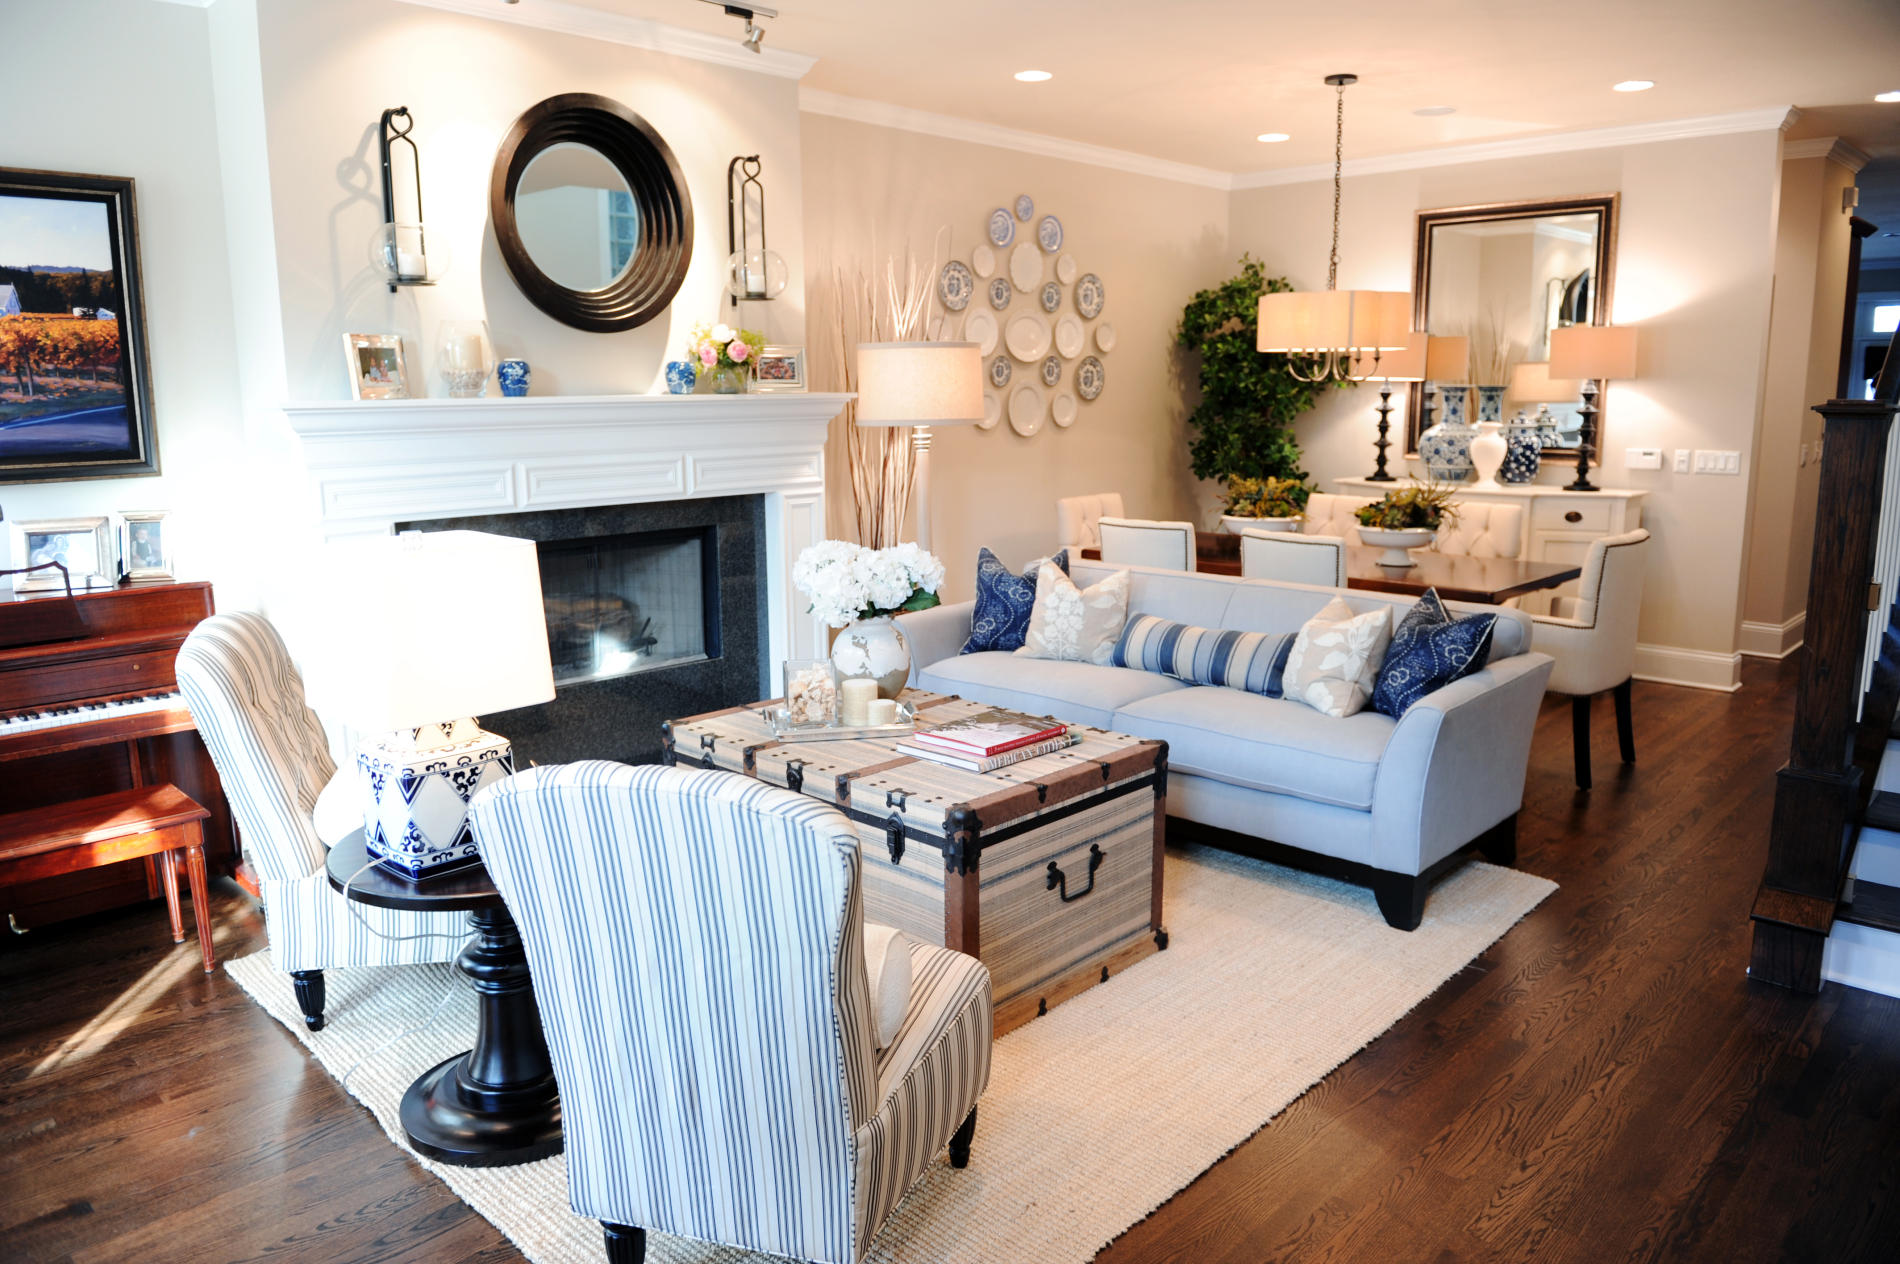 The storage chest coffee table as a centerpiece in a coastal living room